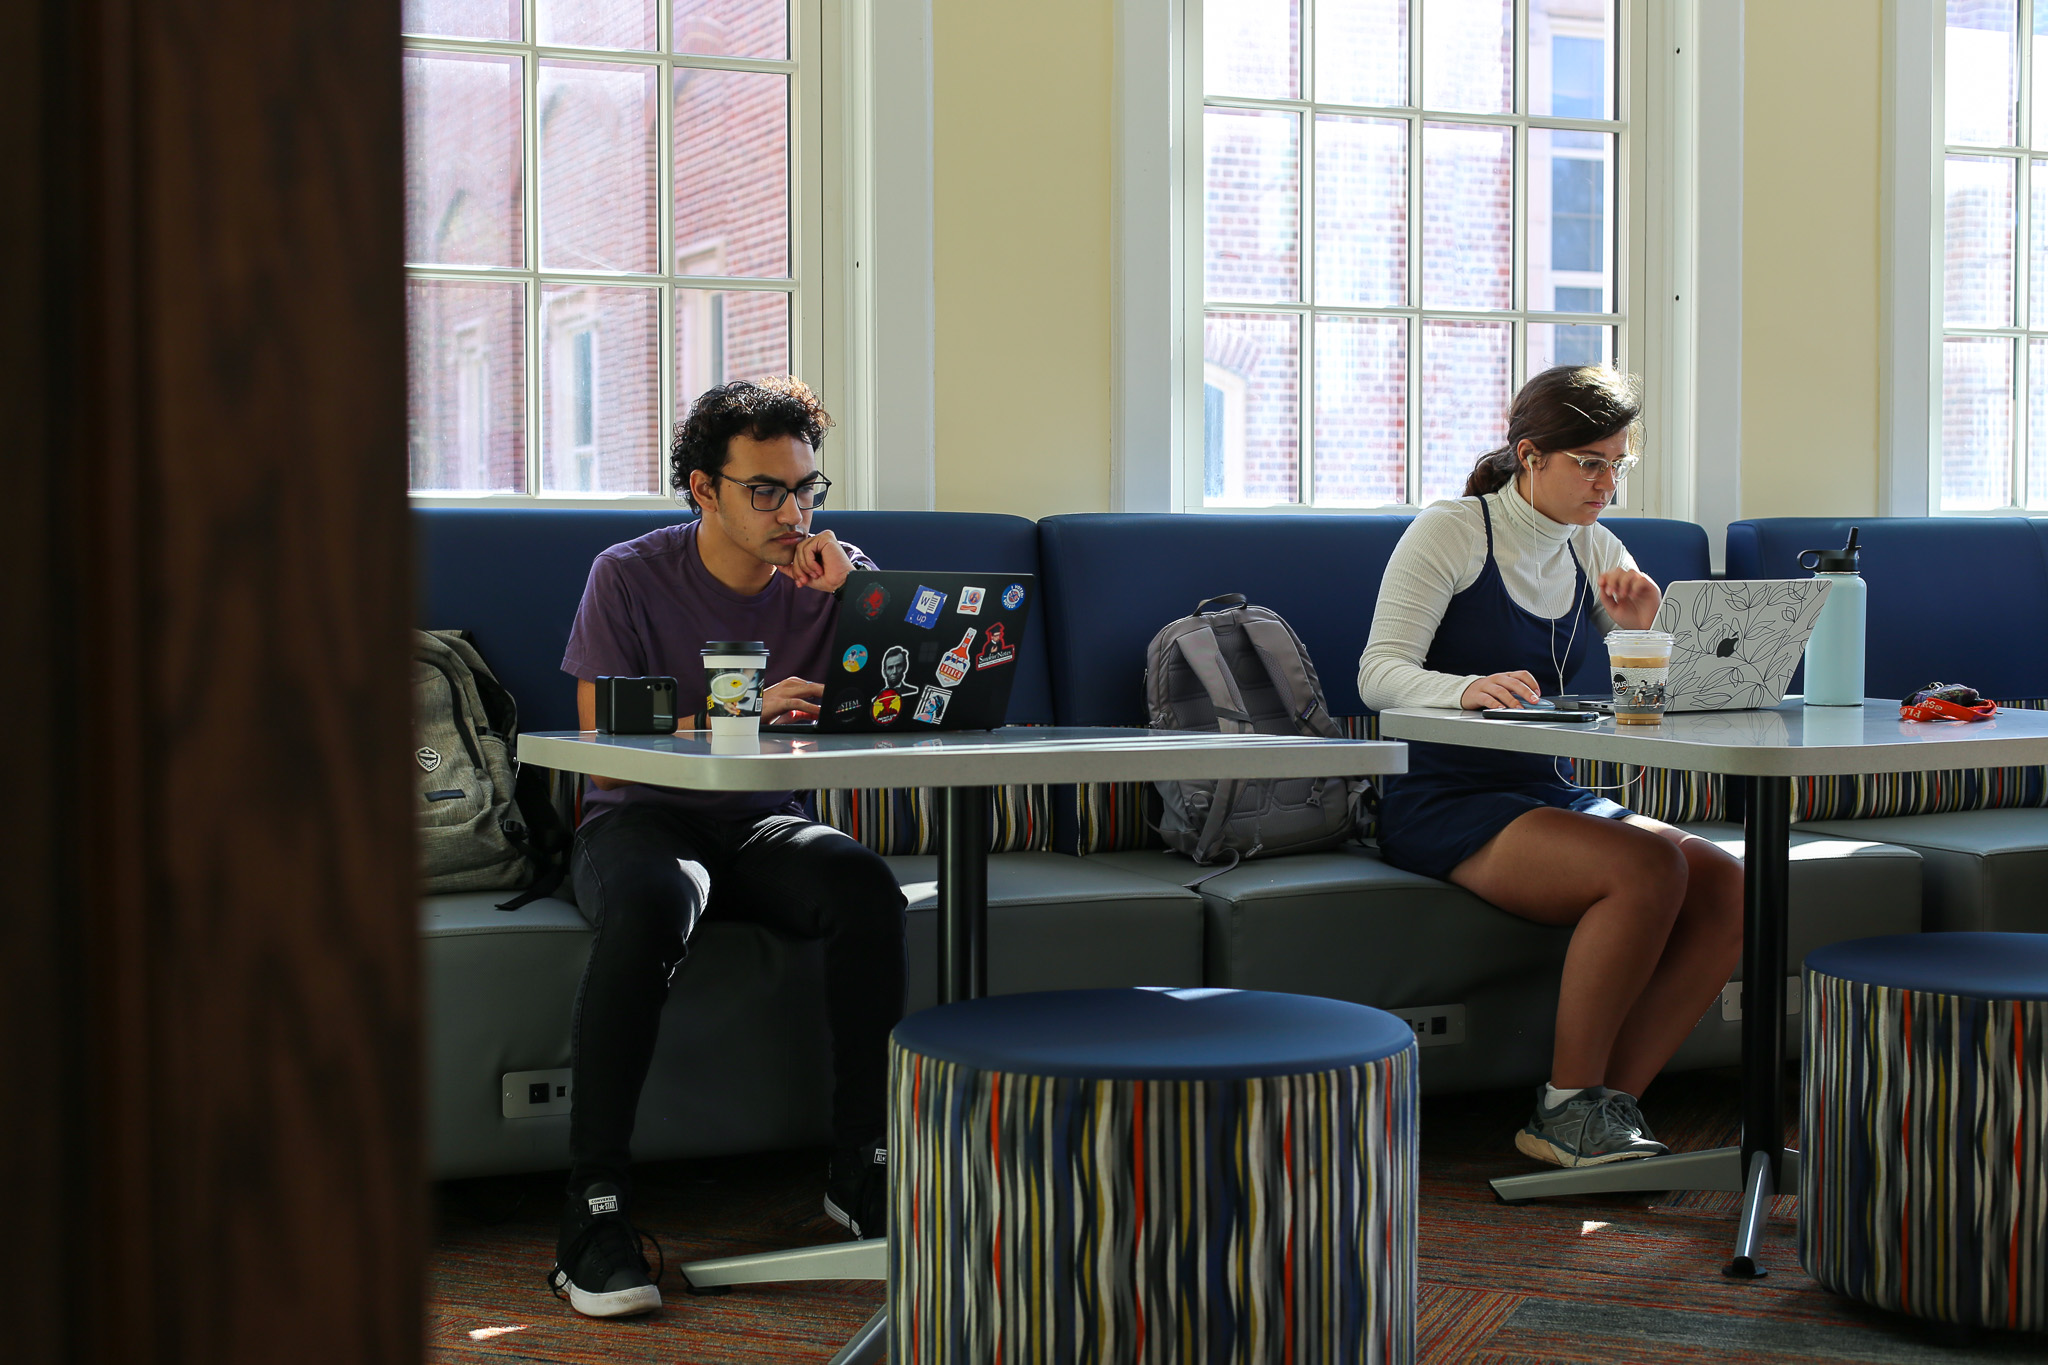 2 students using their laptop in the common space